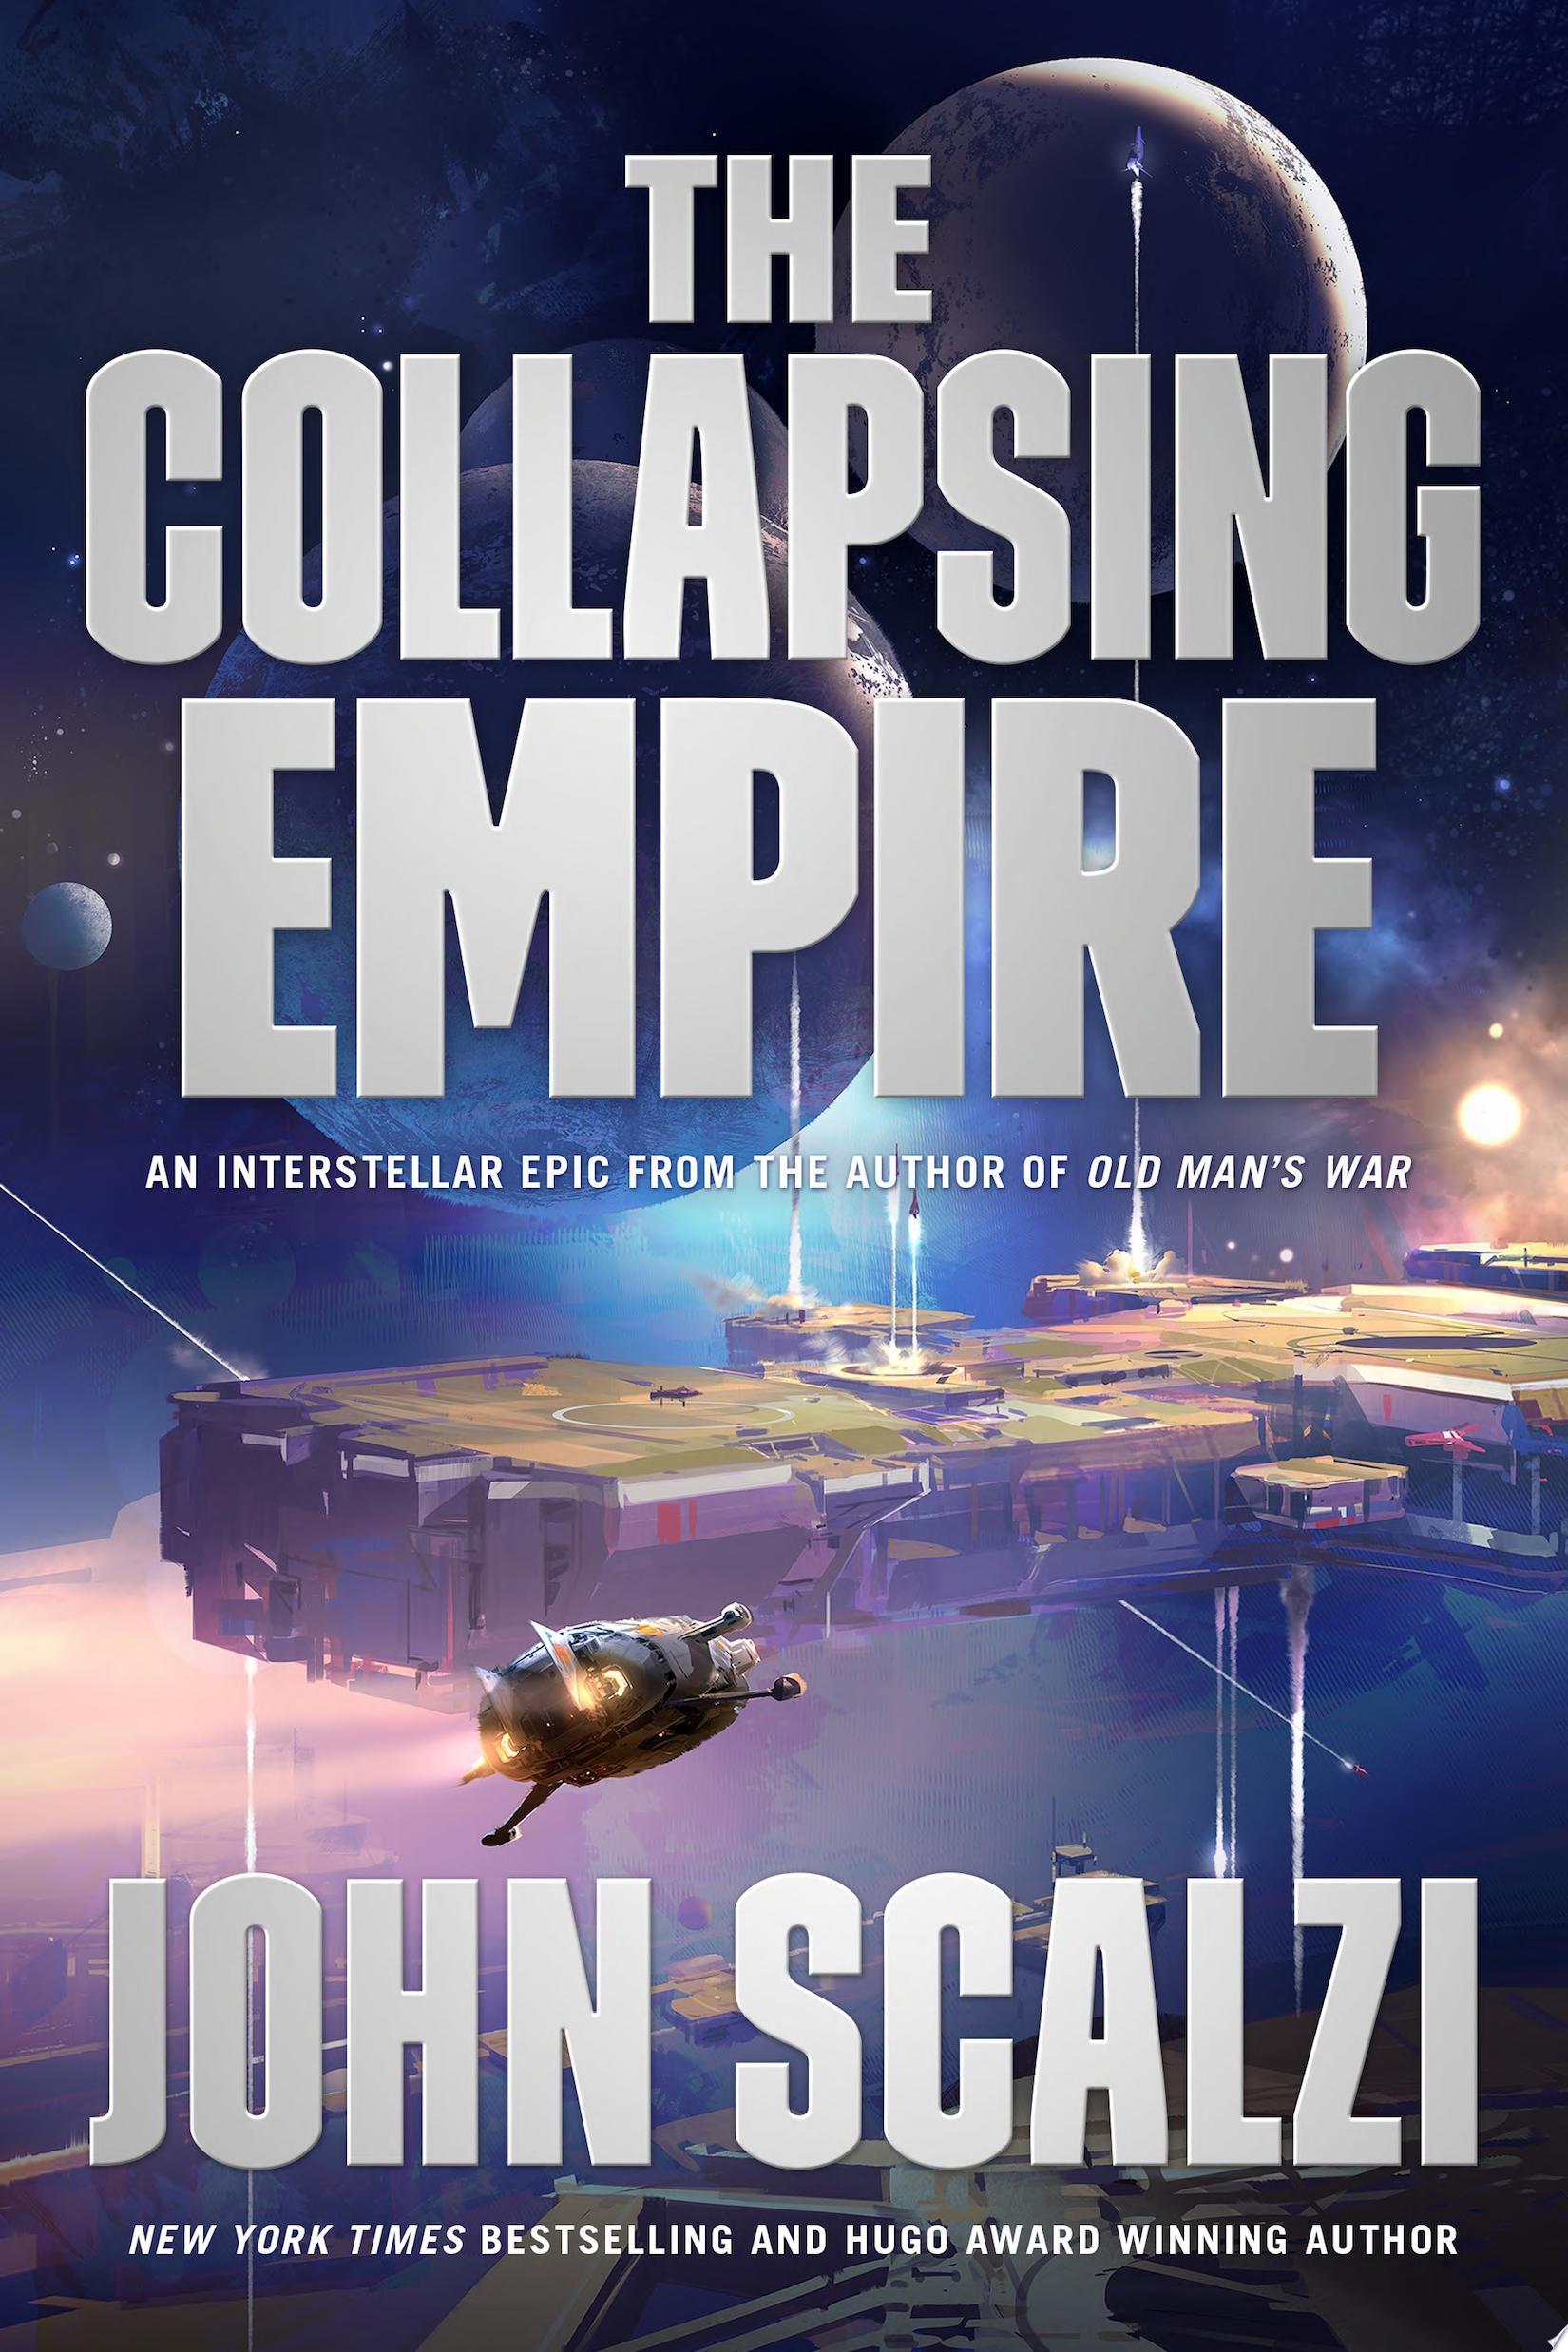 Image for "The Collapsing Empire"